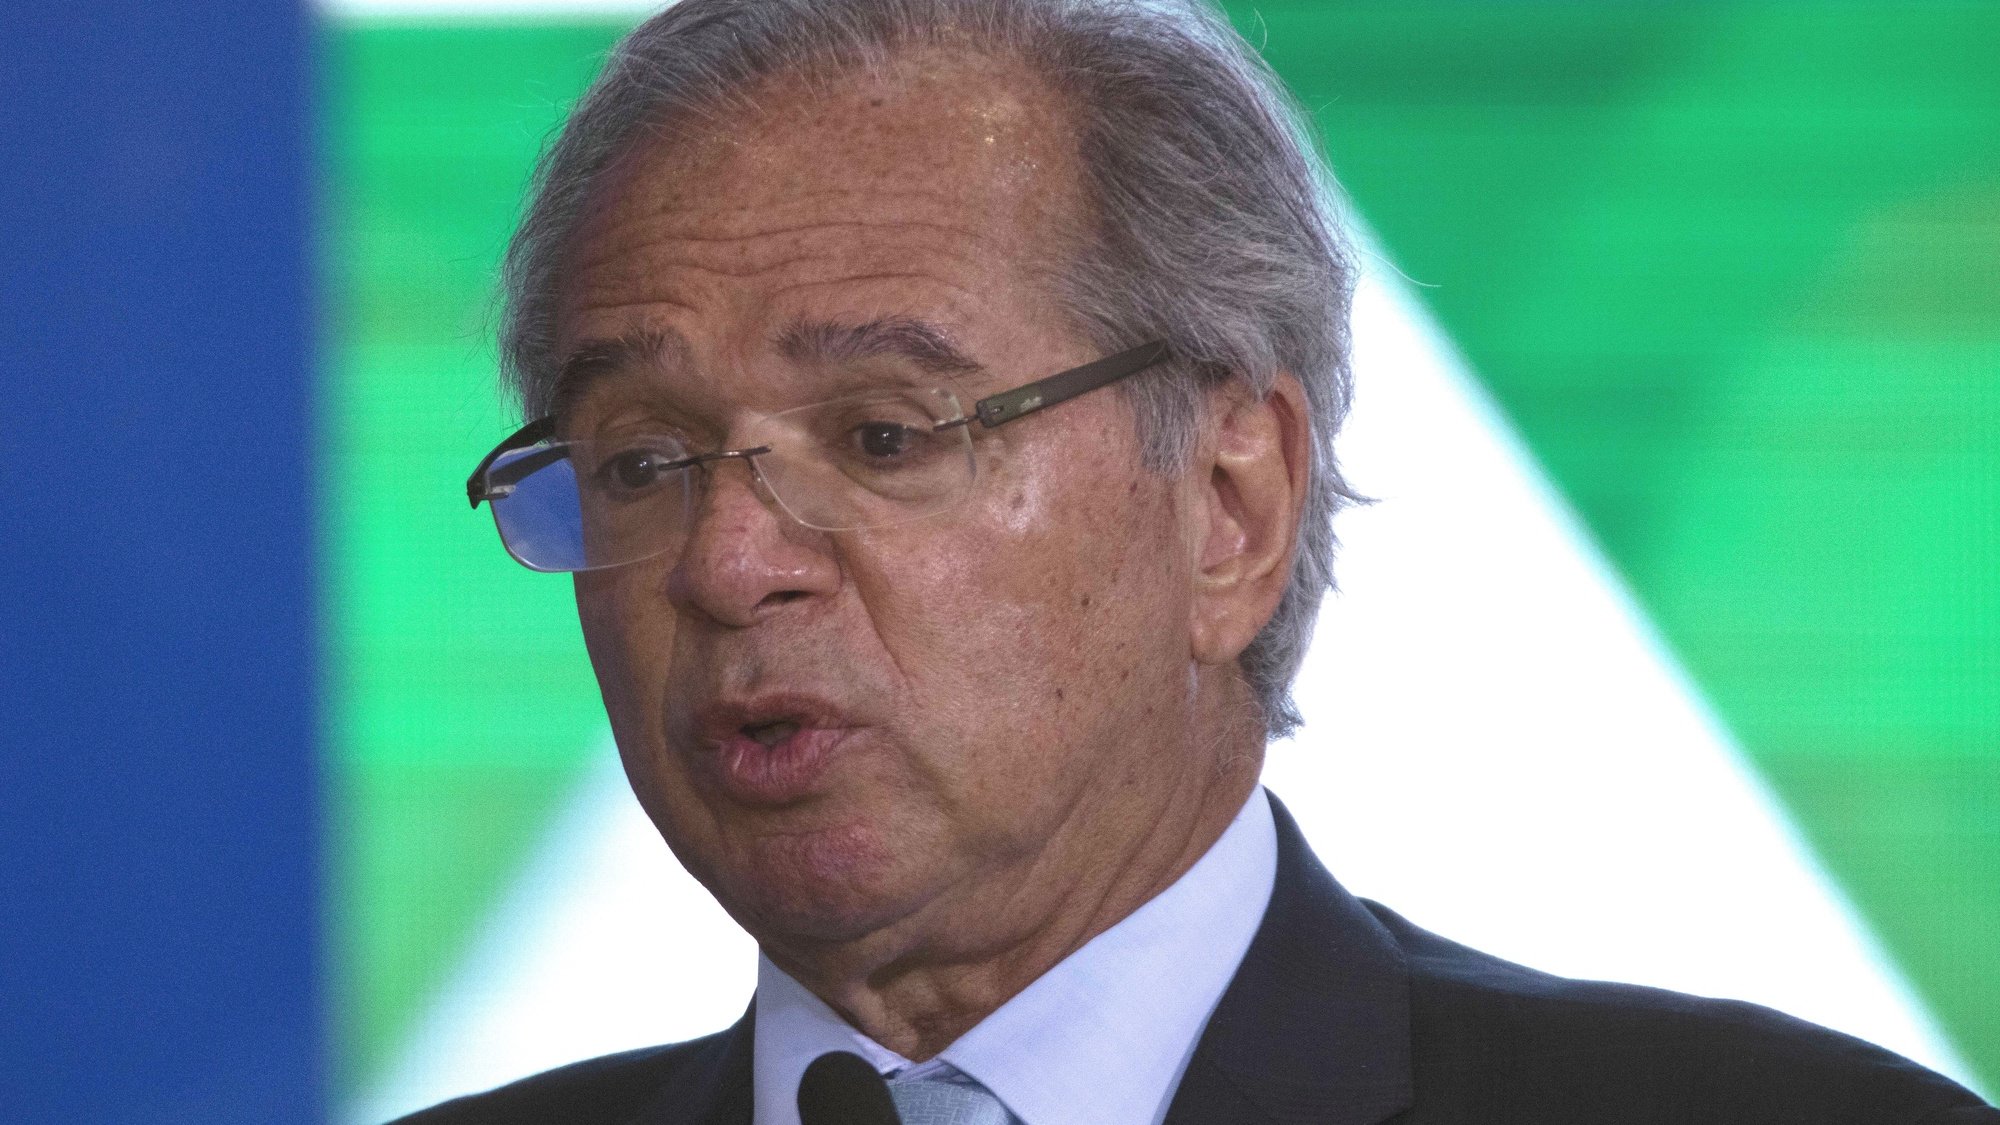 epa10037569 The Minister of the Economy, Paulo Guedes, participates during the presentation of new national identity documents, including the new Brazilian passport in the Palace do Planalto of Brasilia, Brazil, 27 June 2022.  EPA/Joedson Alves